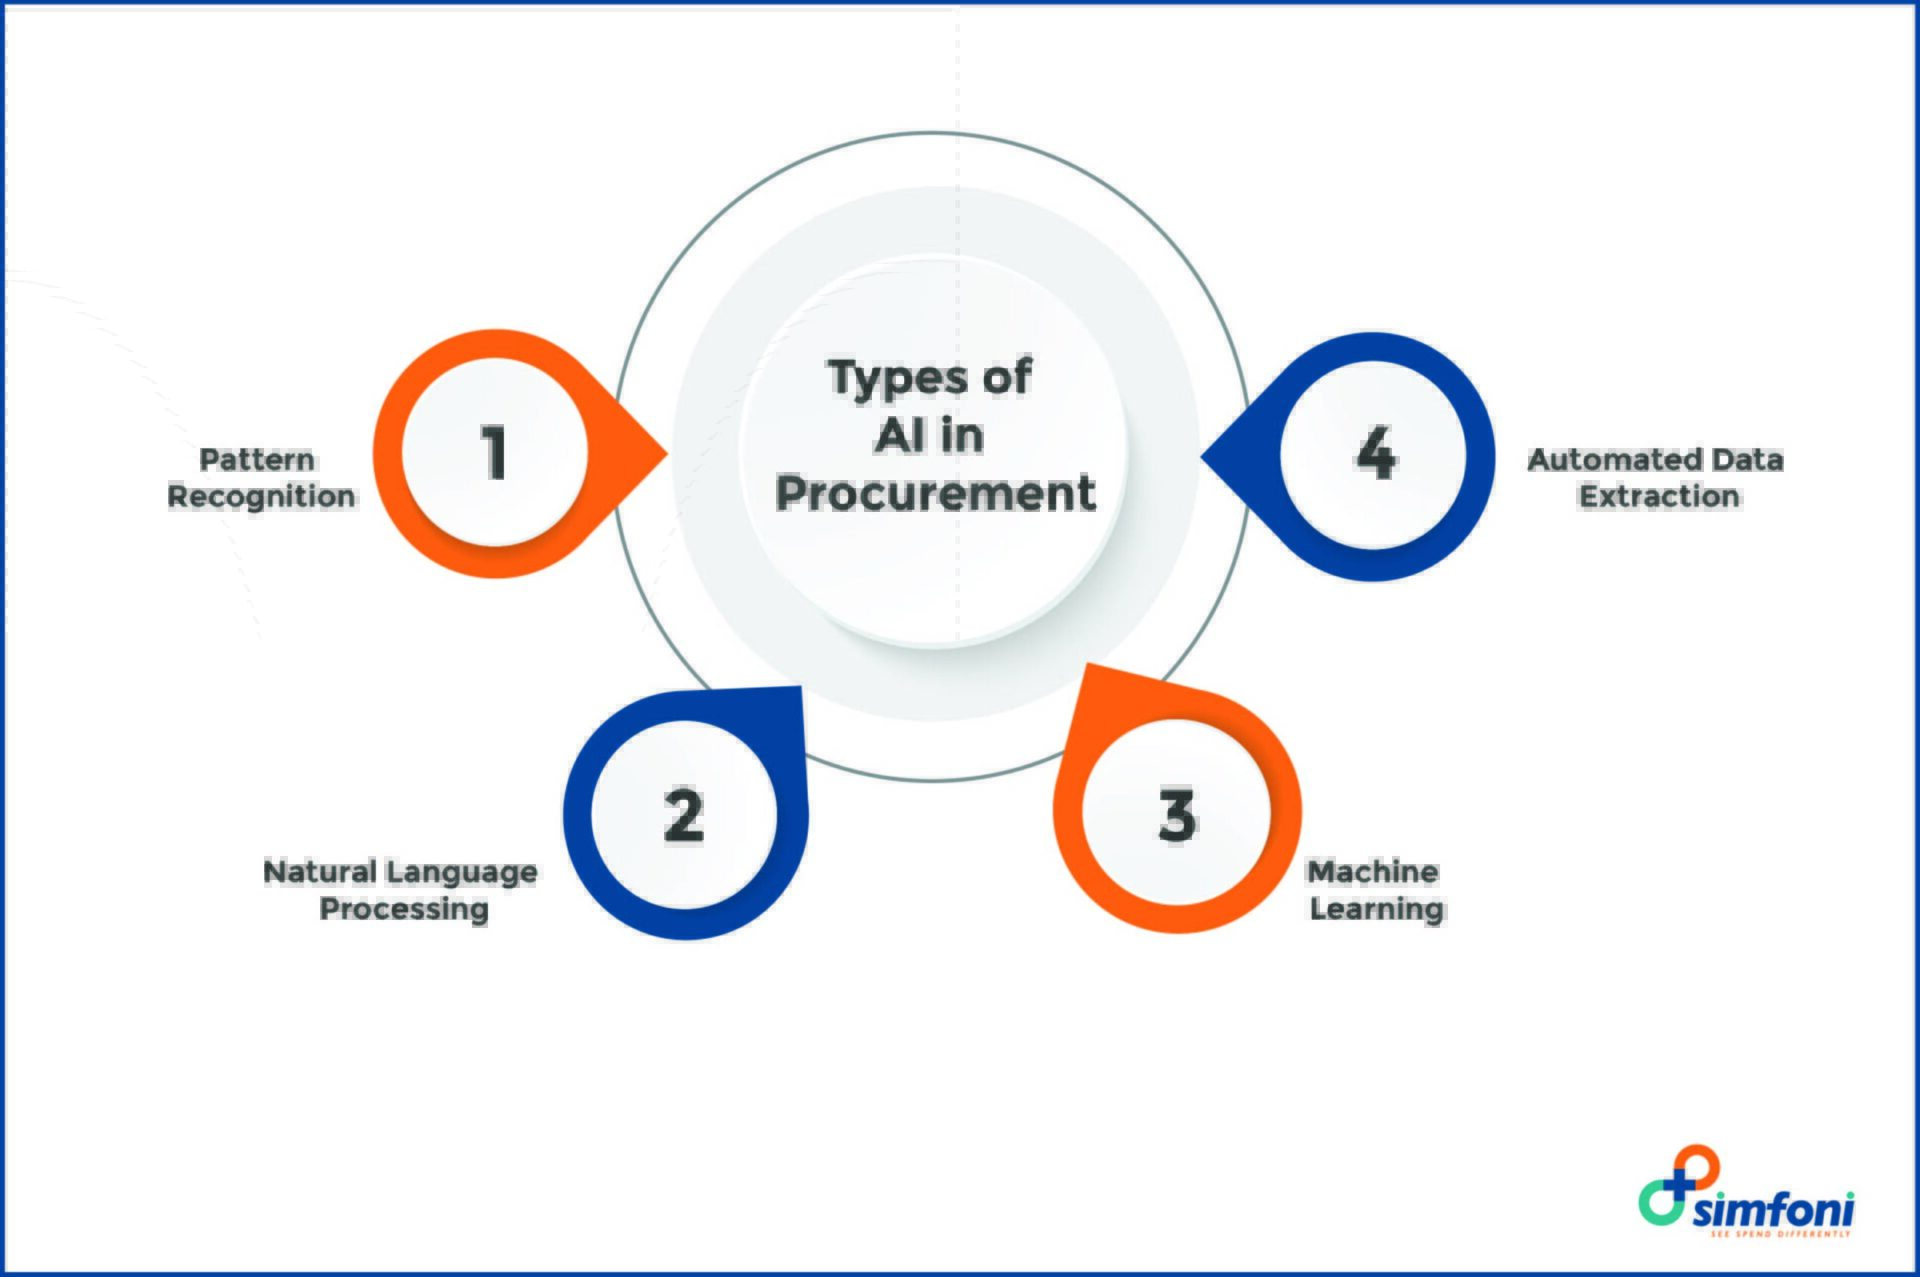 Types of AI in Procurement